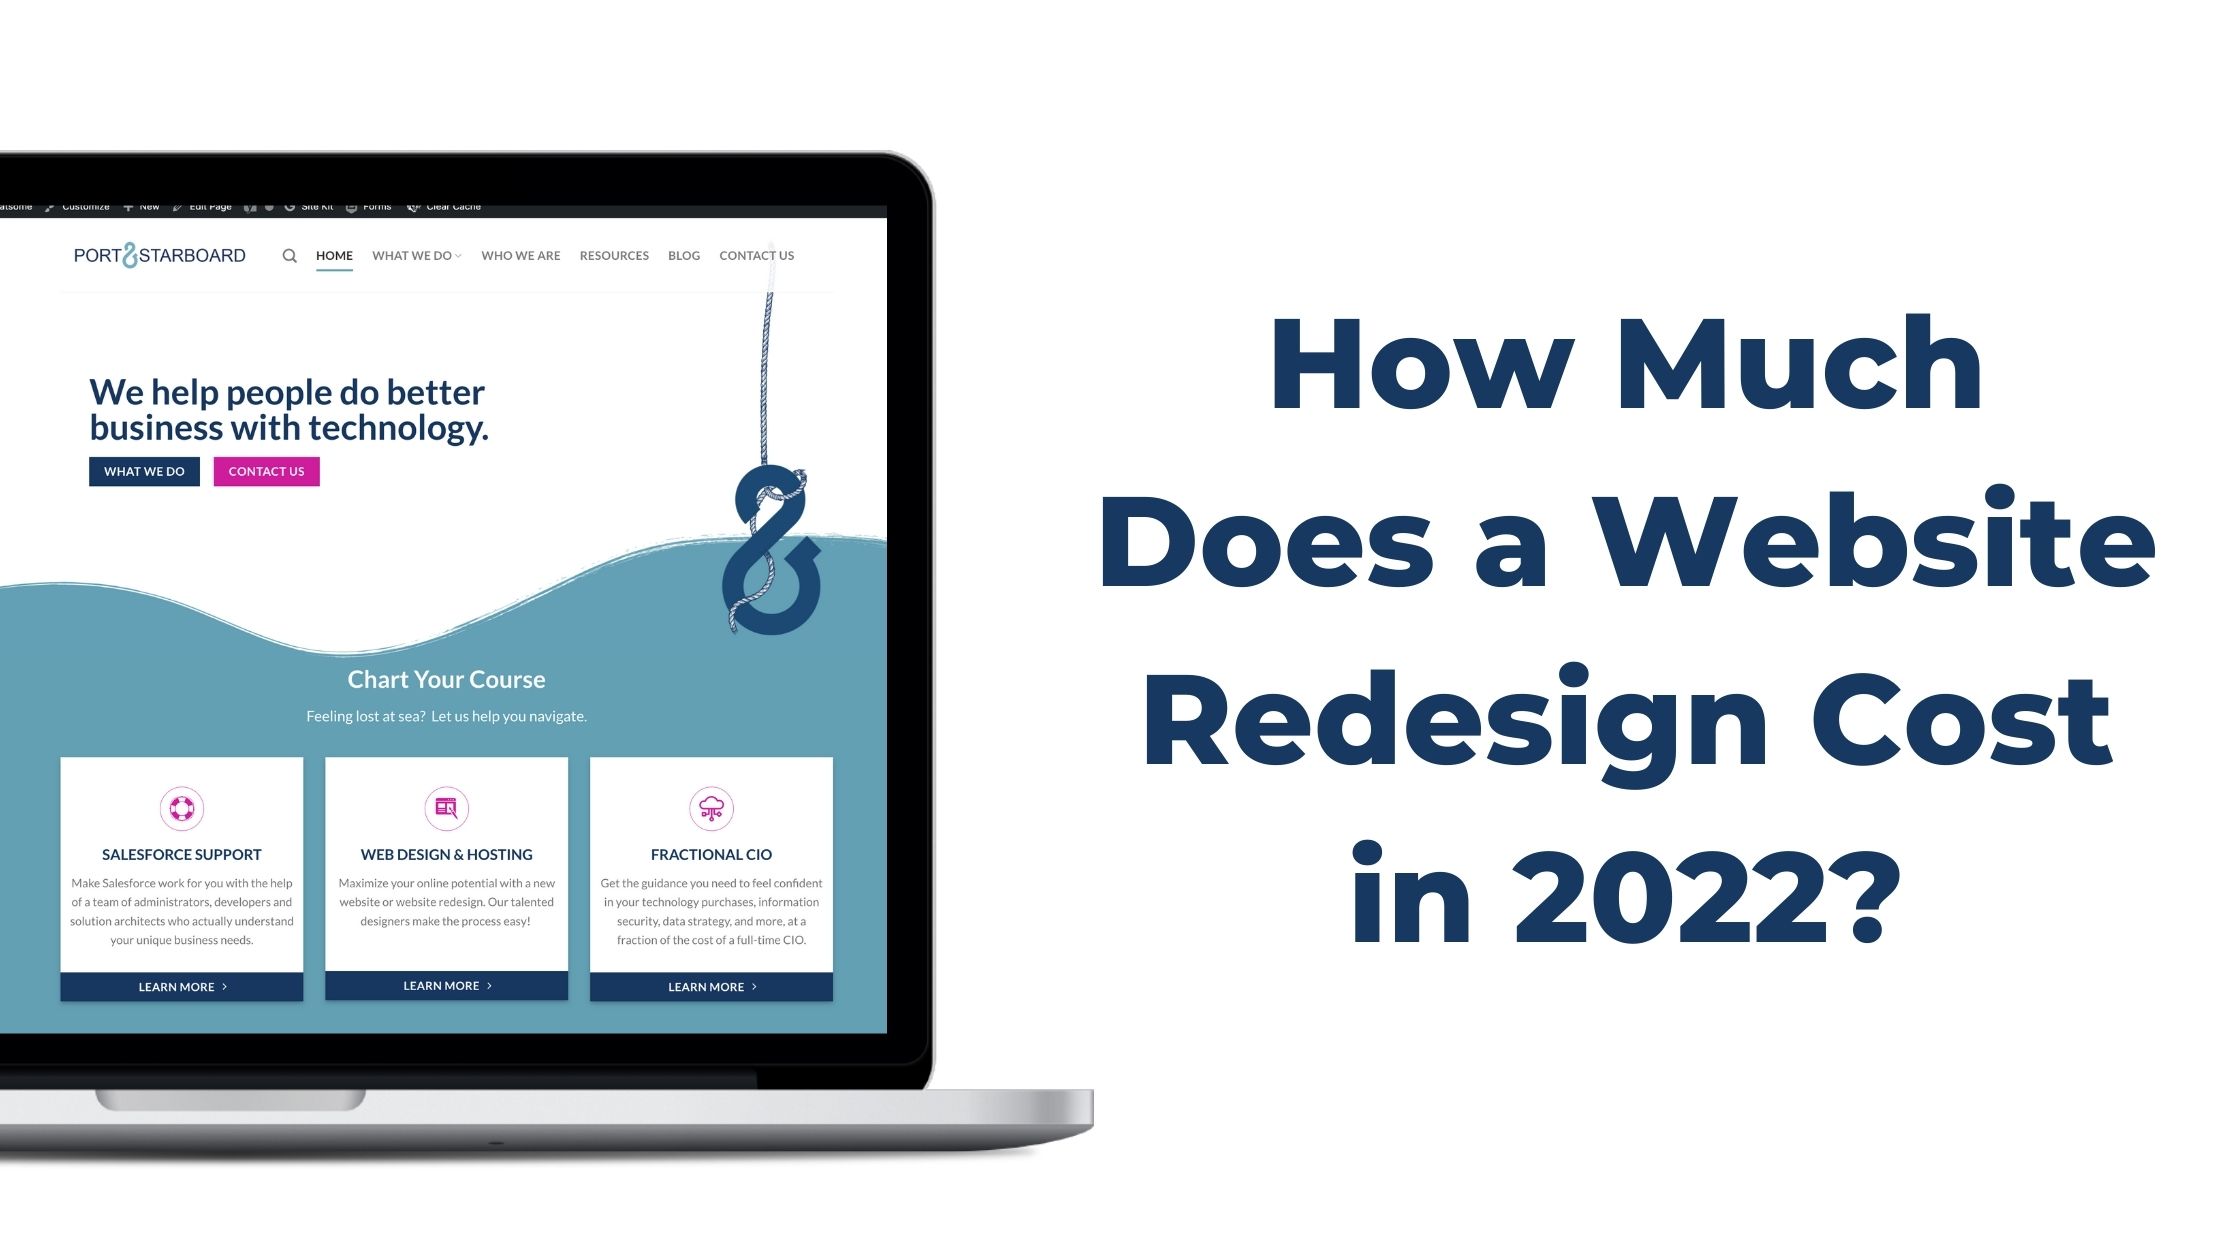 Guide to budgeting for your website redesign cost